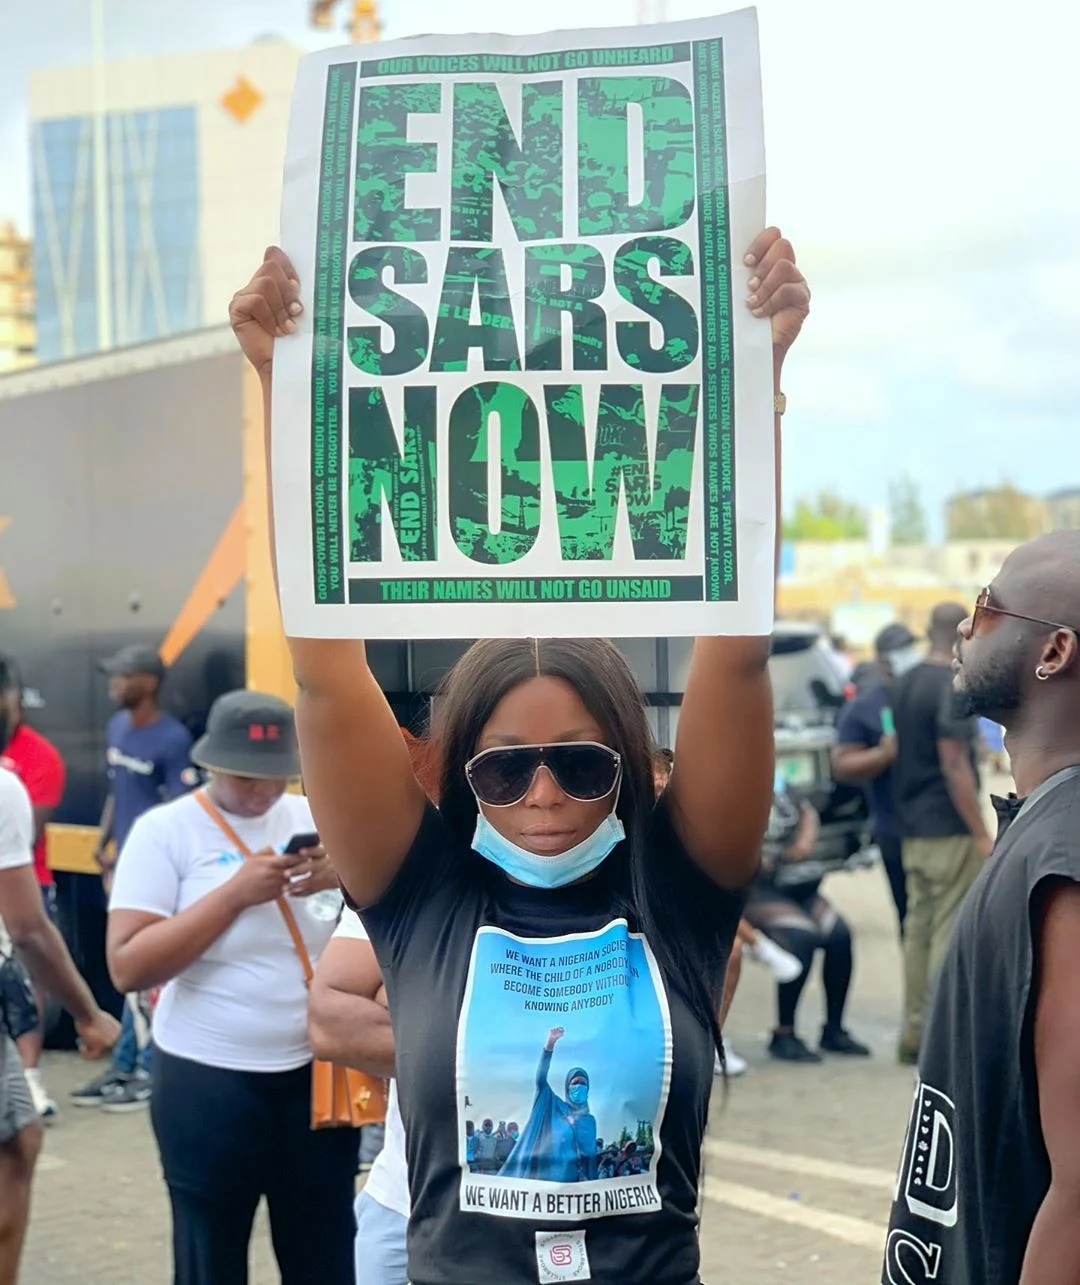 END SARS NOW